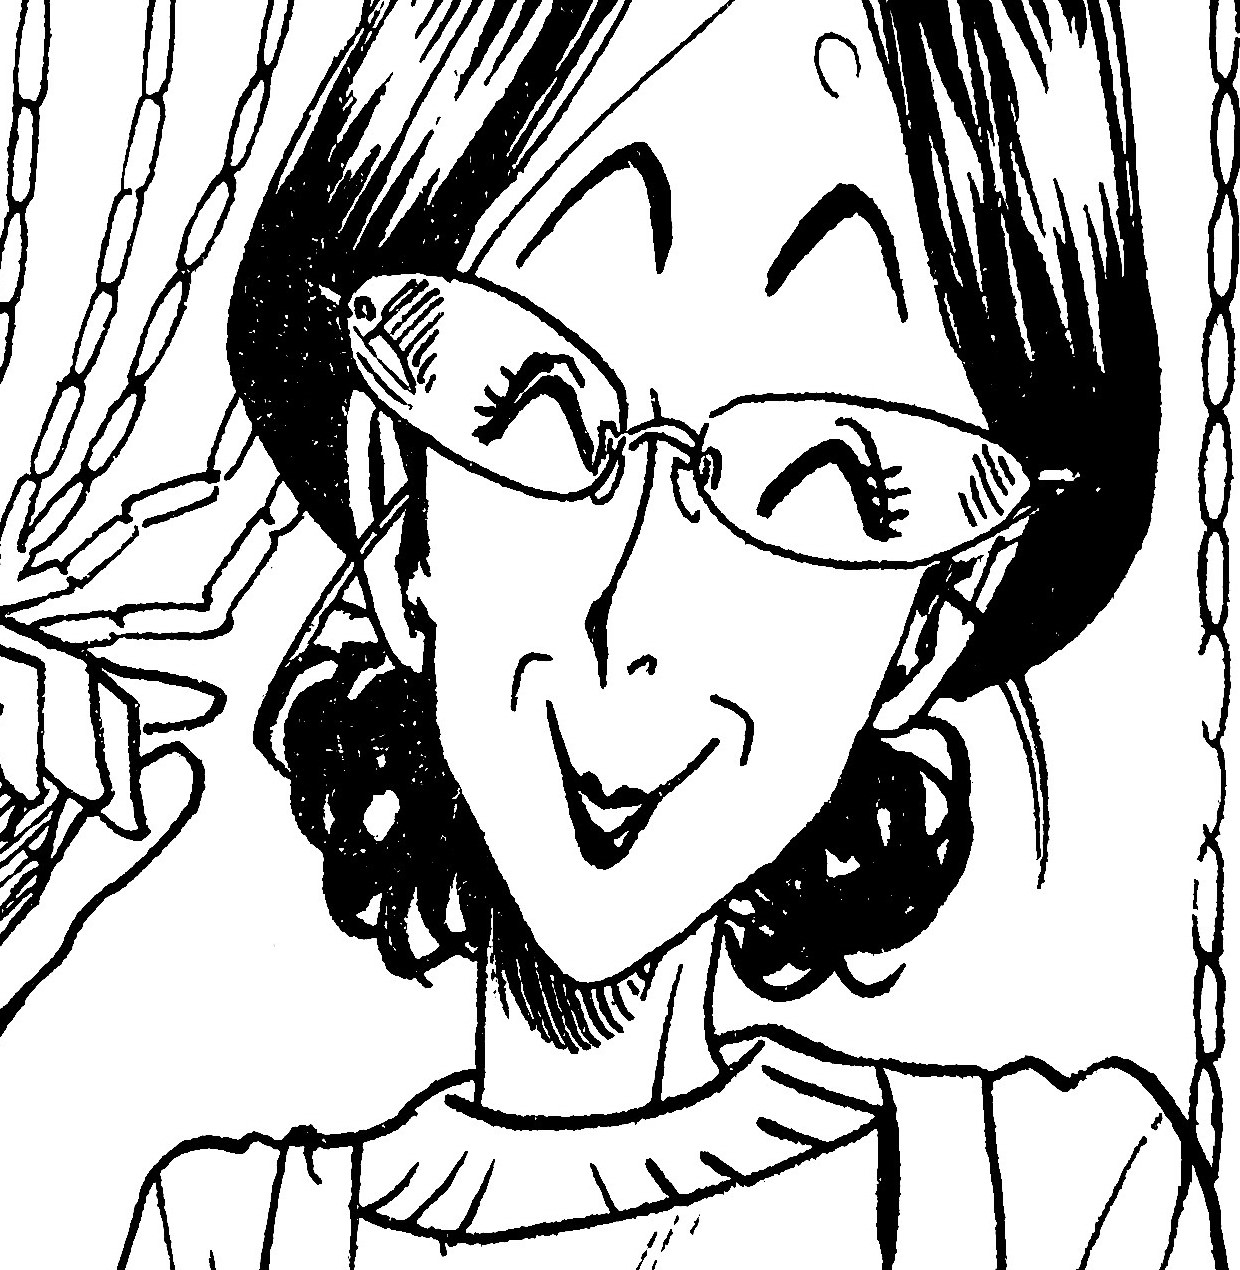 A black and white illustration of Yukimitsu's mother, Akari, smiling cheerfully. She's a skinny older woman wearing pointed eye glasses, dark lipstick, and hair tied back in a bun. Her features and large forehead resemble Yukimitsu's.